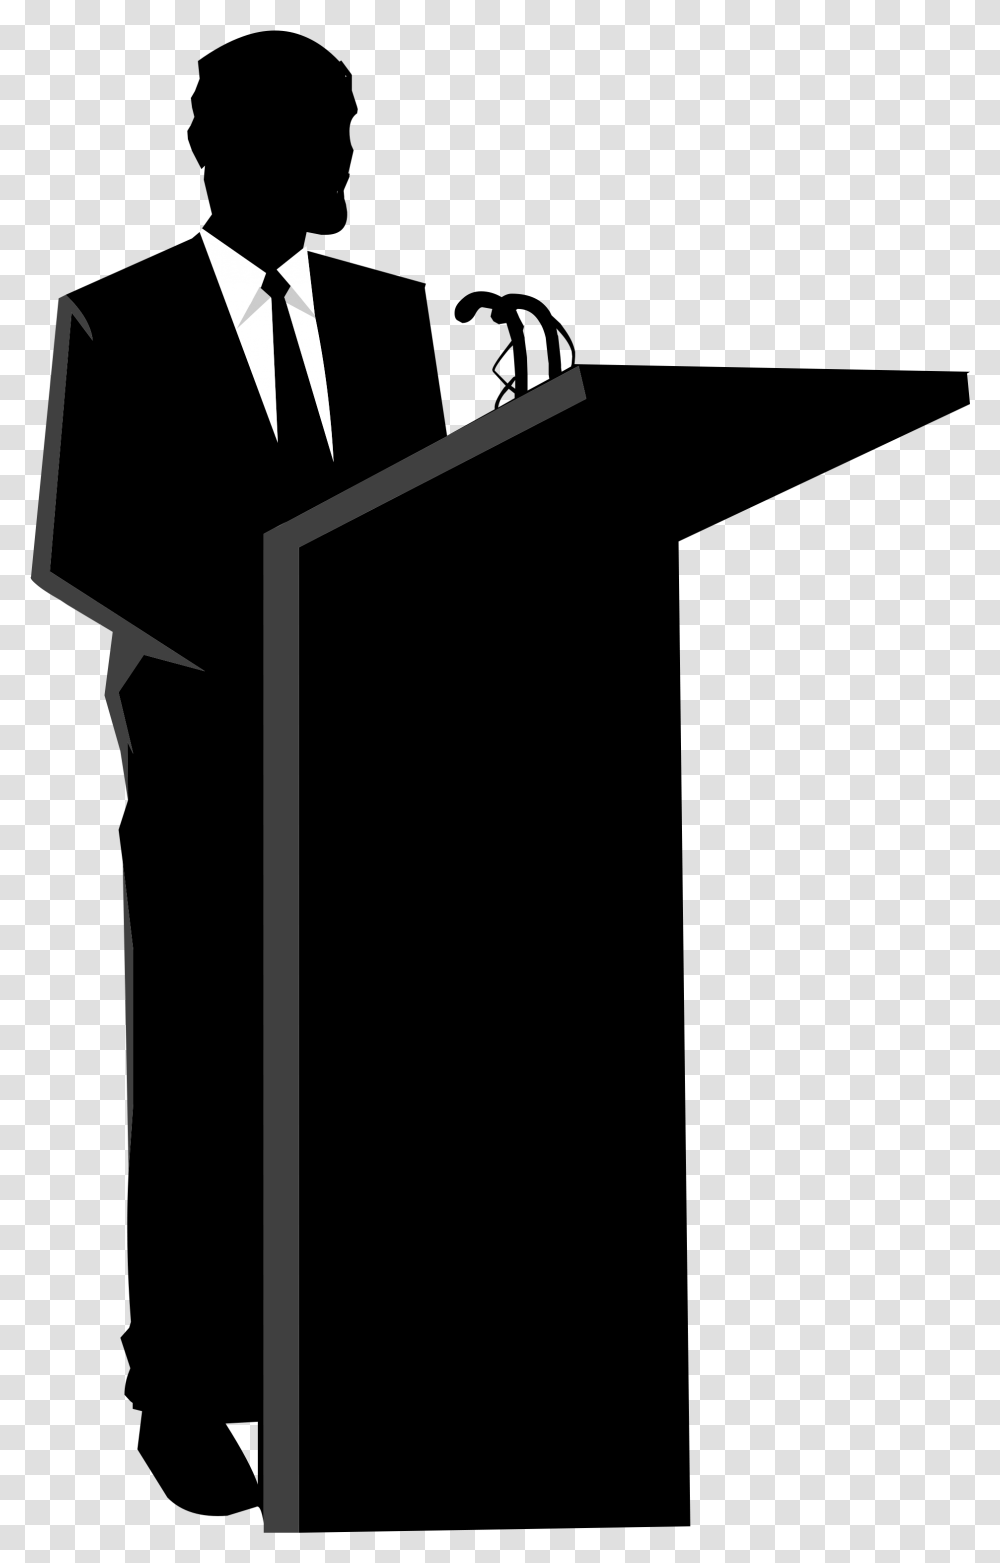 Person Speaking At Podium, Cross, Silhouette Transparent Png